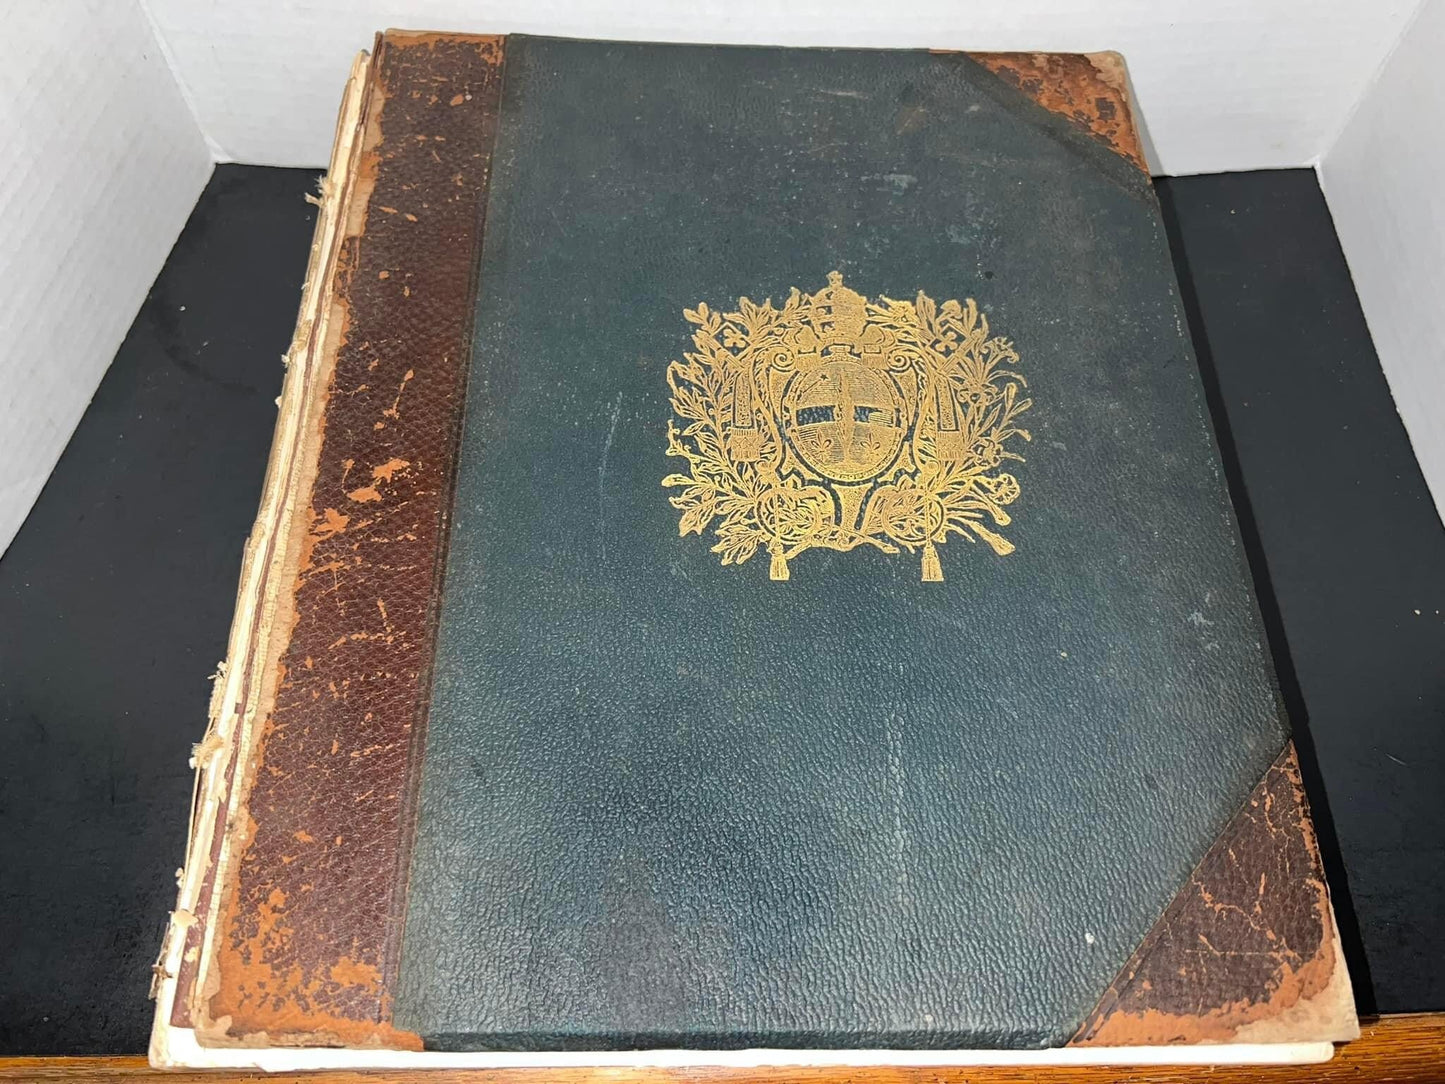 Antique 1895 Glories if the Catholic Church — Art , architecture and history Profusely illustrated